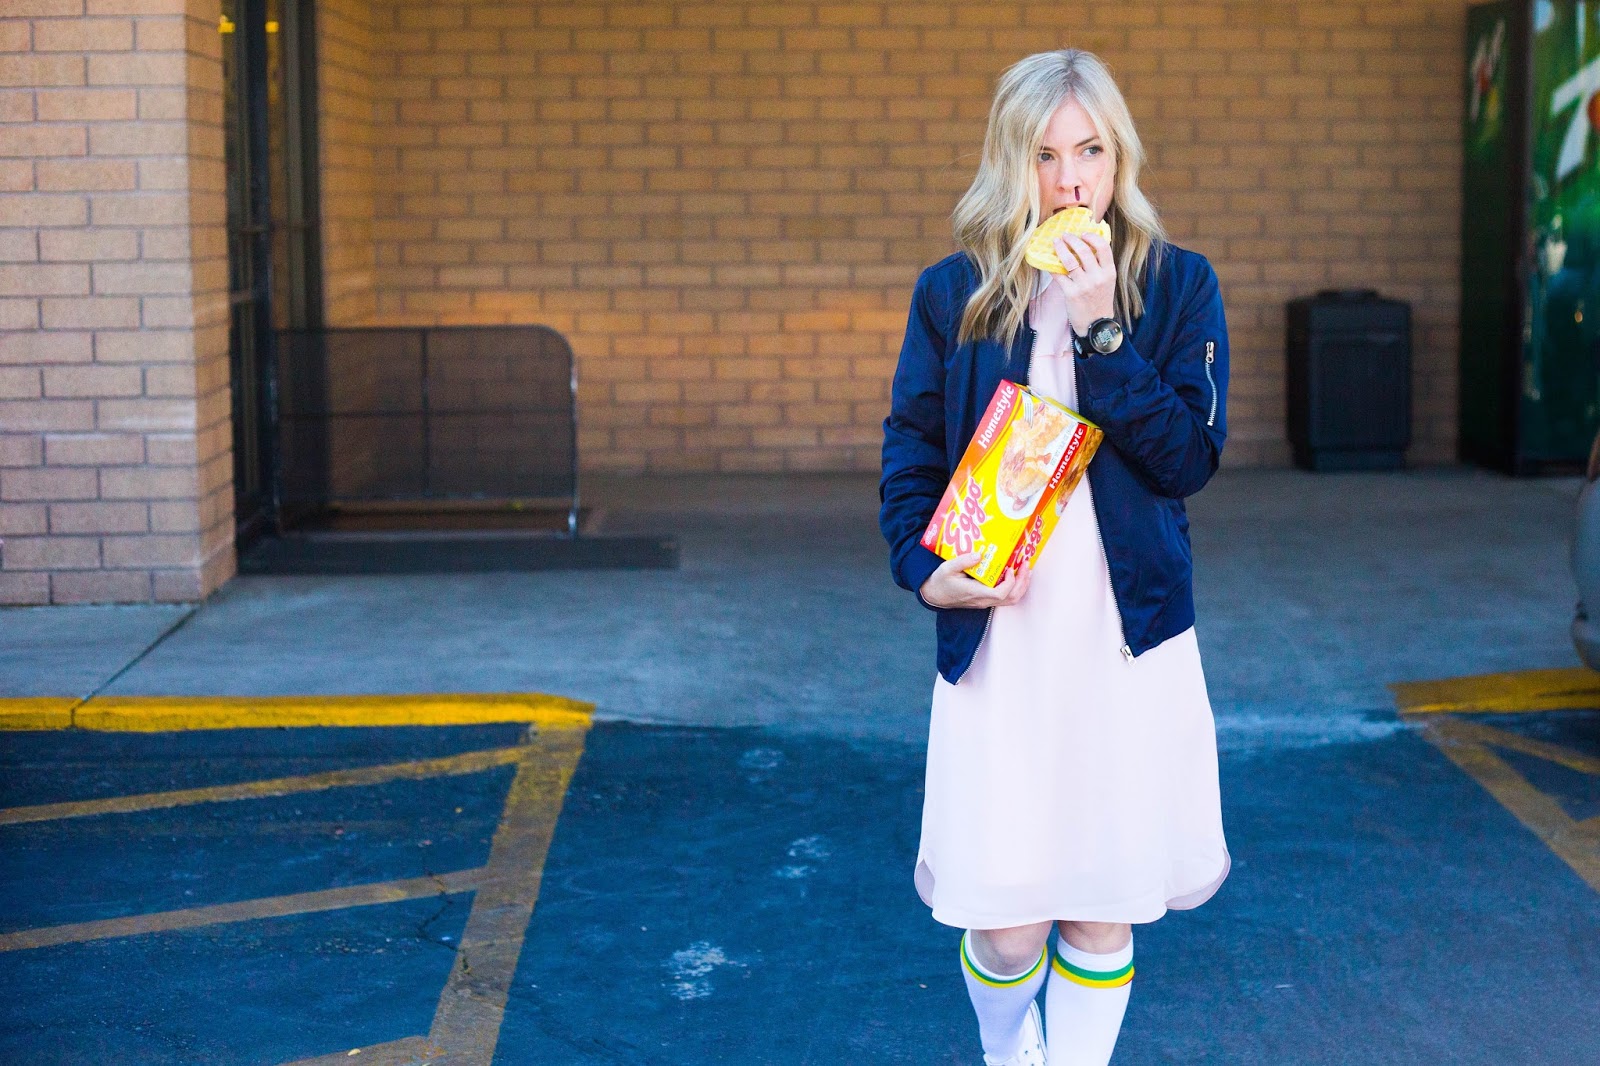 do it yourself divas: DIY Eleven Costume From Stranger Things1600 x 1066